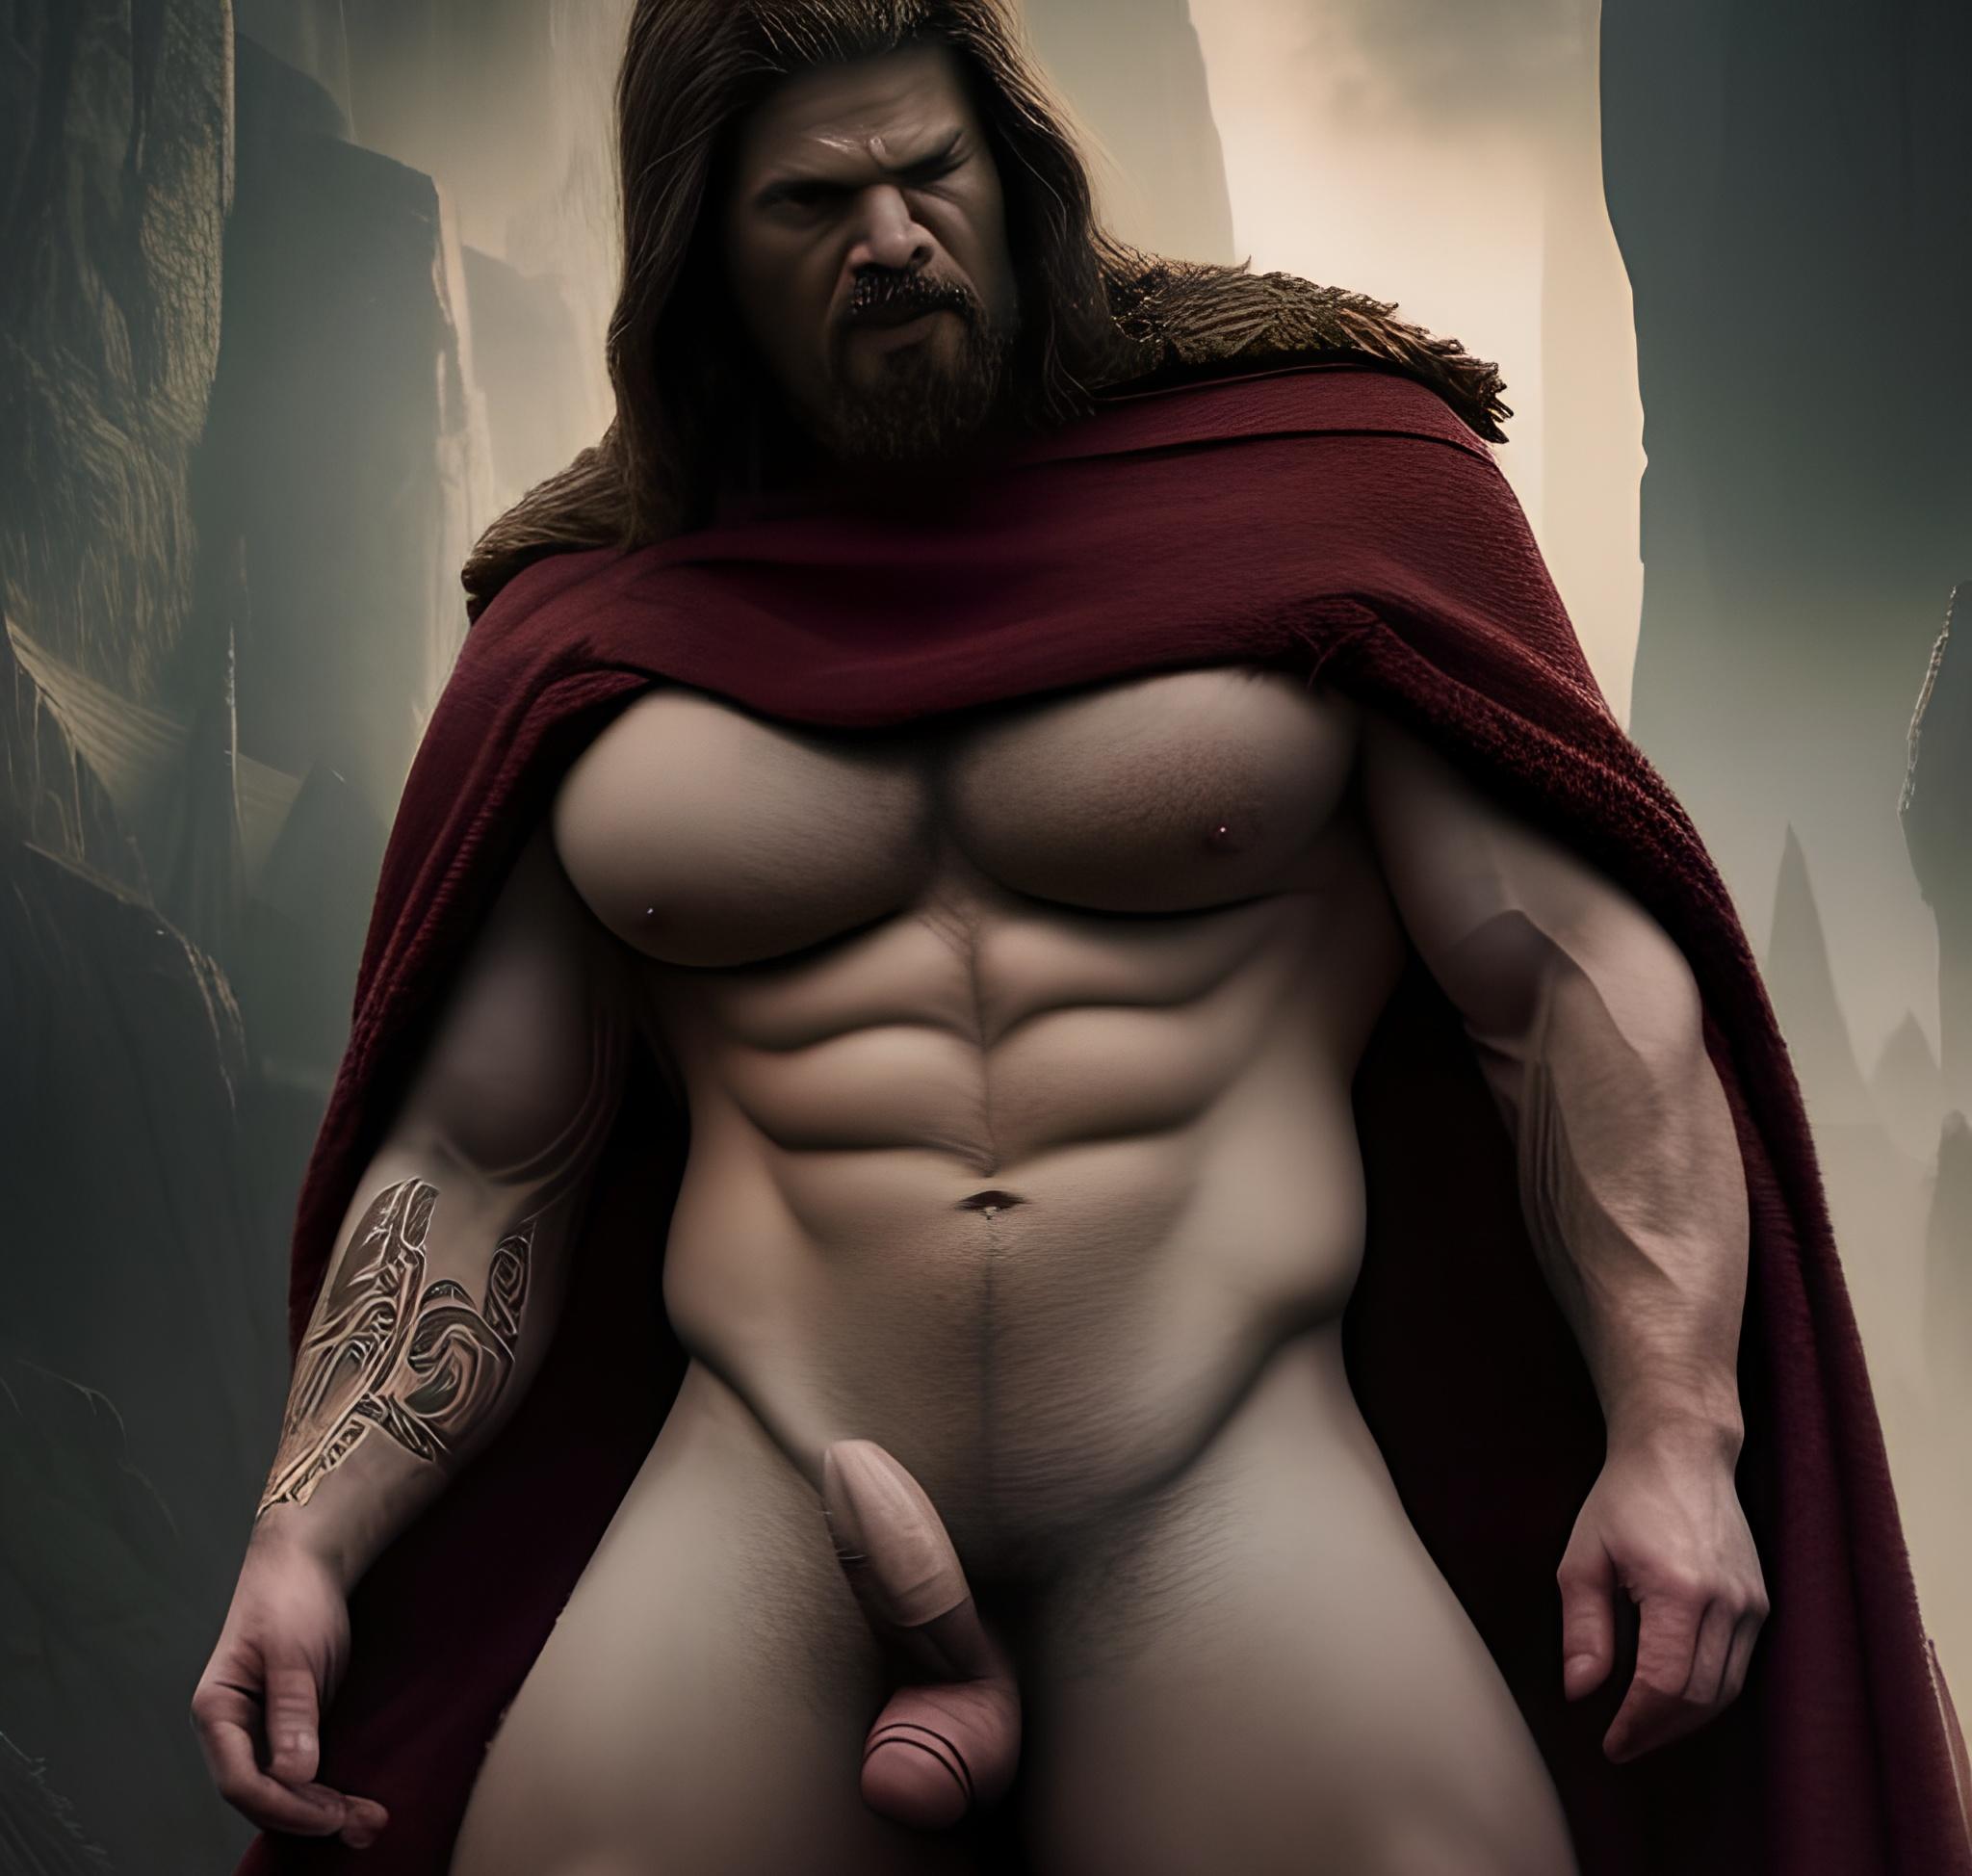 Nude Famous Toon Tattoo - 30yo Viking Bodybuilder's Erect Thick Big Dick in Dark Fantasy Mountains:  Angry Black Hair, Partially Nude,